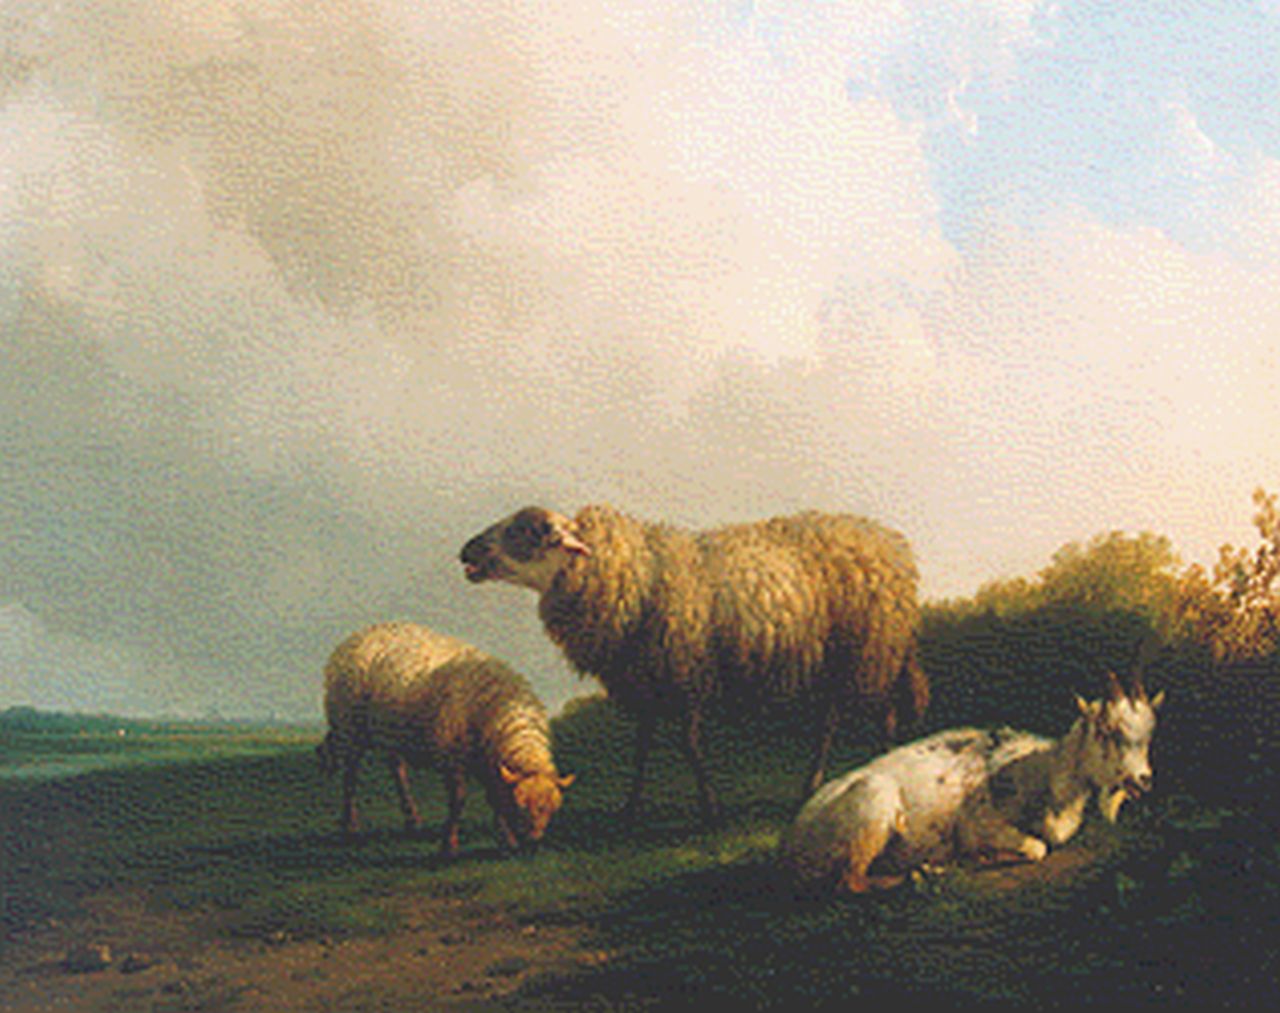 Plas P.  | Pieter Plas, Cattle in a landscape, oil on panel 30.2 x 38.2 cm, signed l.r. and dated 1848